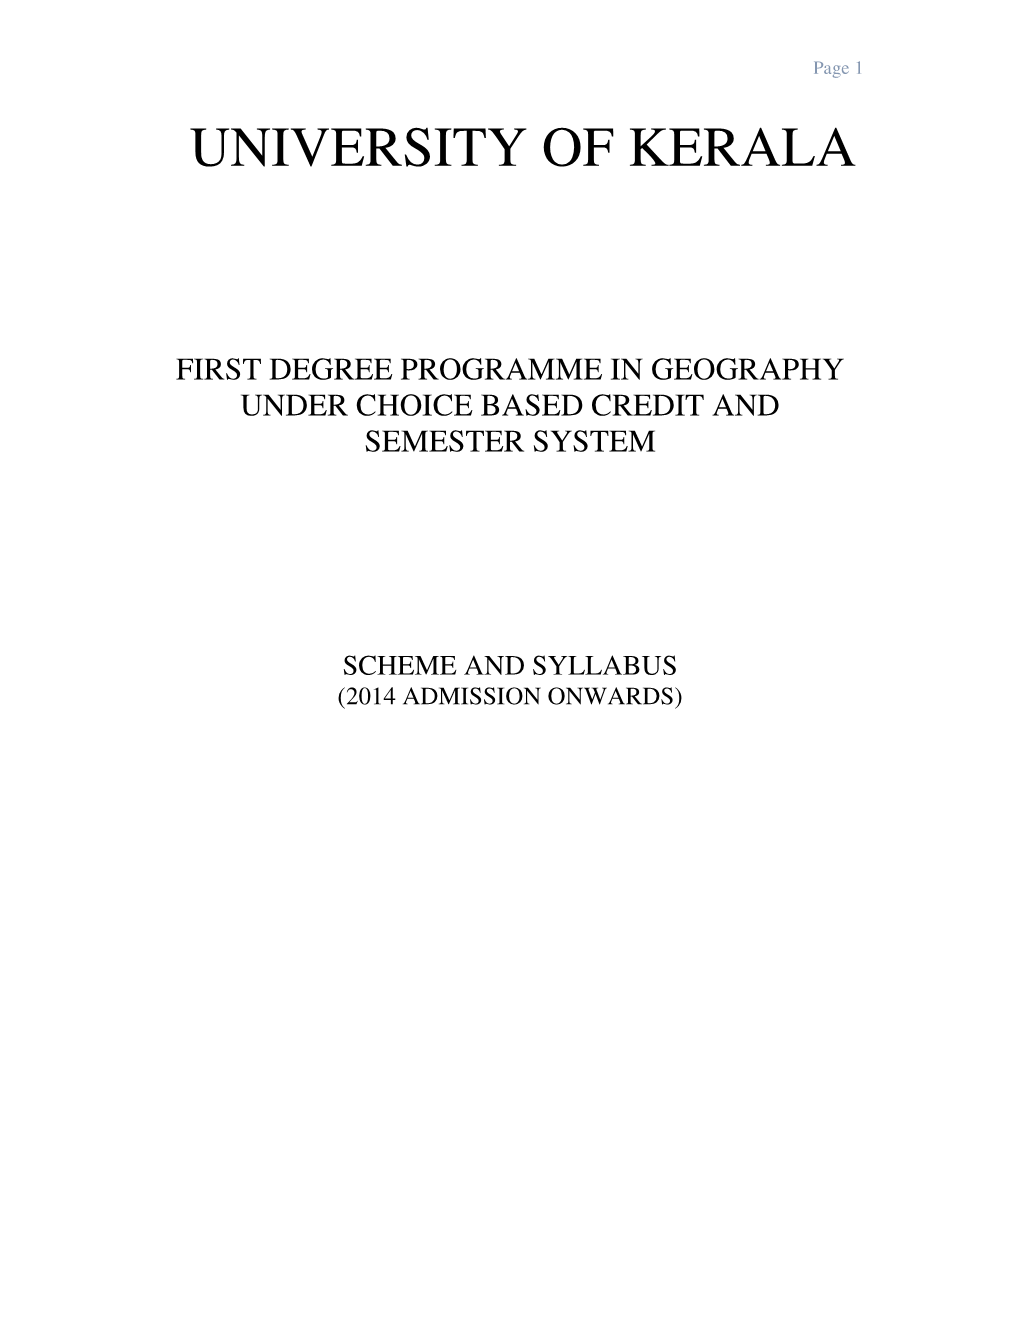 Geography Under Choice Based Credit and Semester System